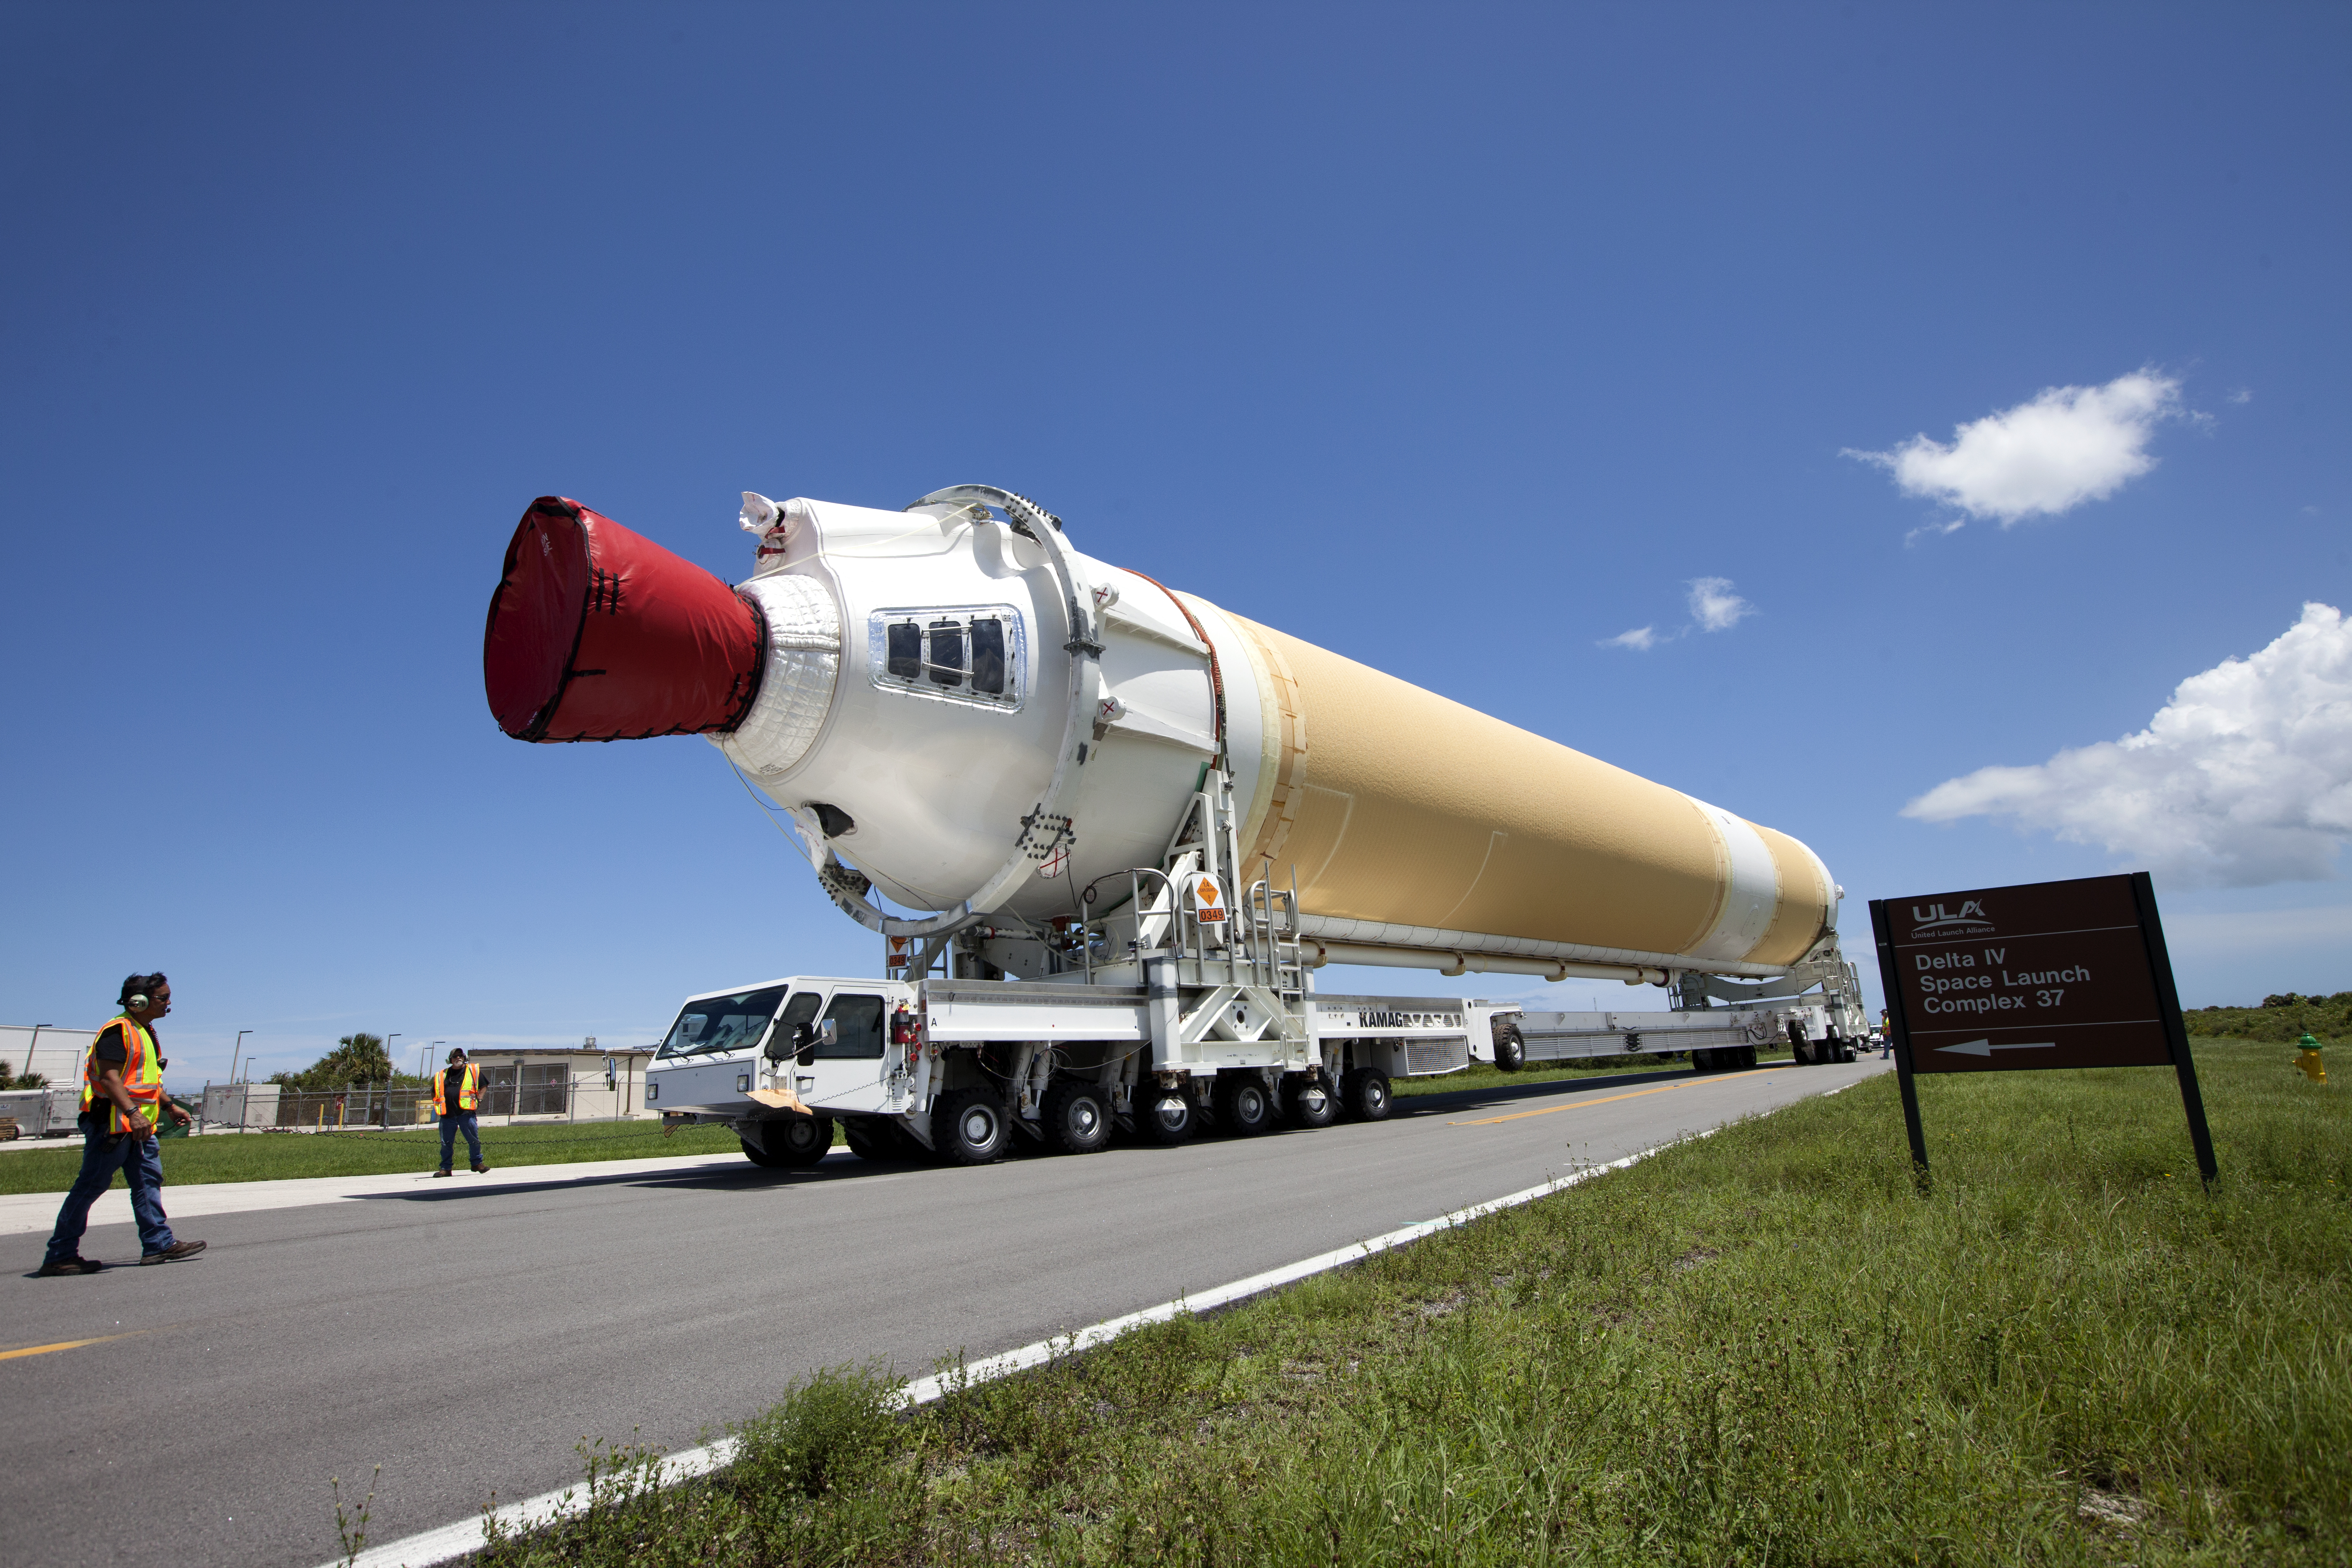 A United Launch Alliance Delta IV Heavy common booster core is transported by truck to Cape Canaveral Air Force Station’s Launch Complex 37 Horizontal Processing Facility after arriving at Port Canaveral. The Delta IV Heavy will launch NASA’s upcoming Parker Solar Probe mission.